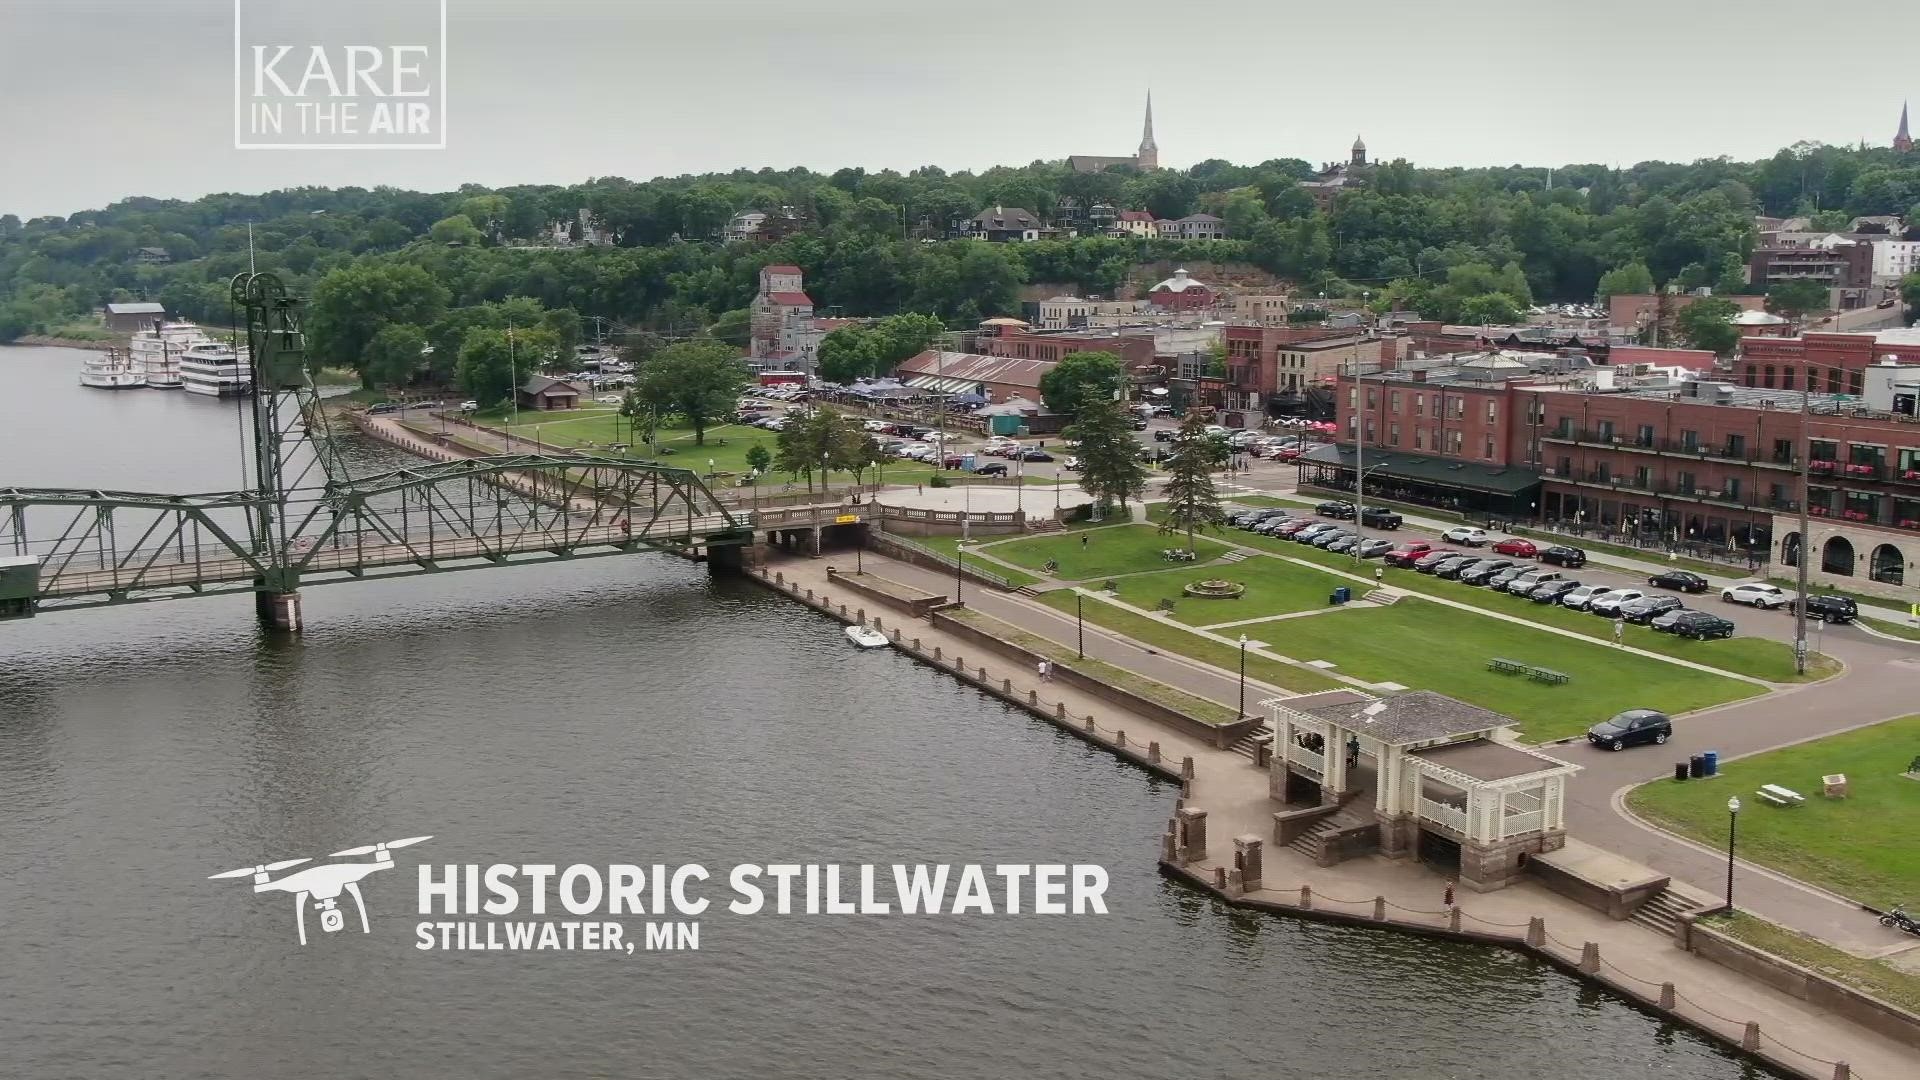 Not only is Stillwater a quaint river town, many consider the city of the St. Croix the historic birthplace of Minnesota.